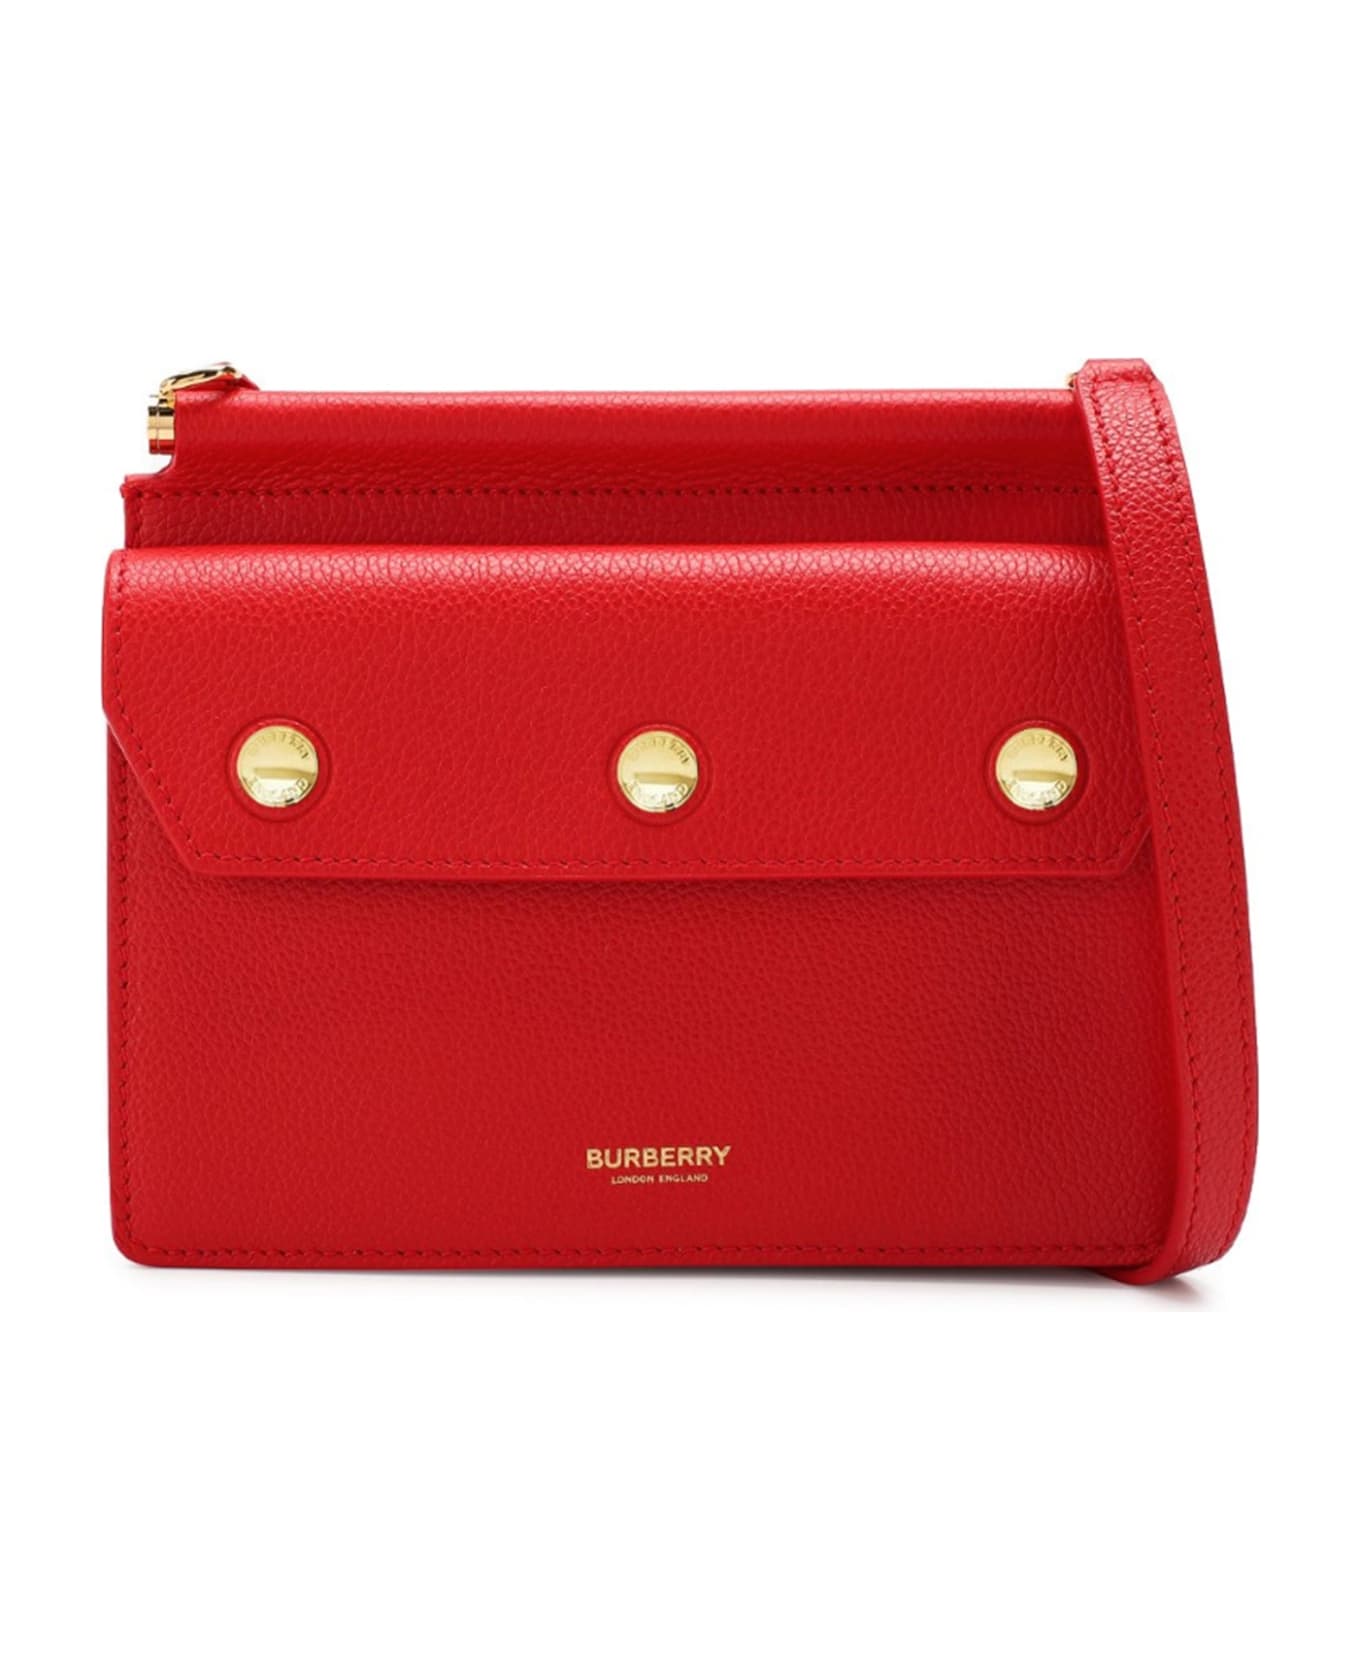 Burberry Mini Leather Title Bag - Red